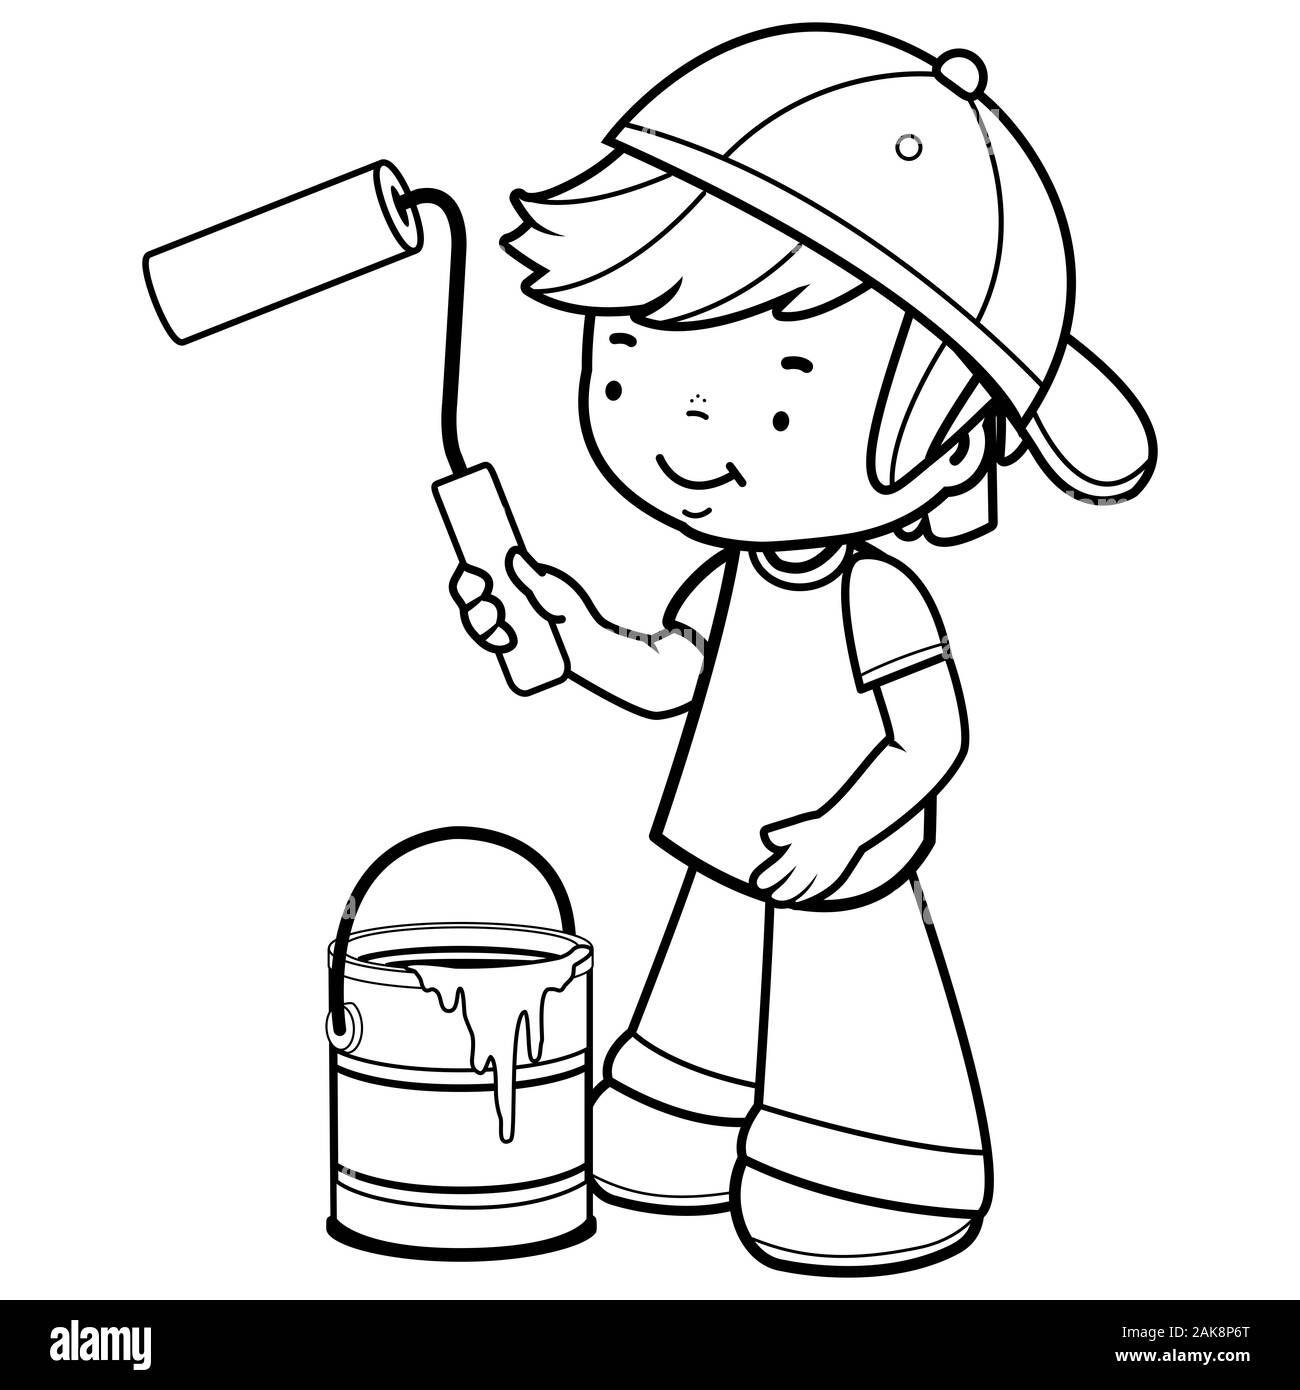 Boy painting with a paint roller and a paint bucket. Black and white coloring page. Stock Photo